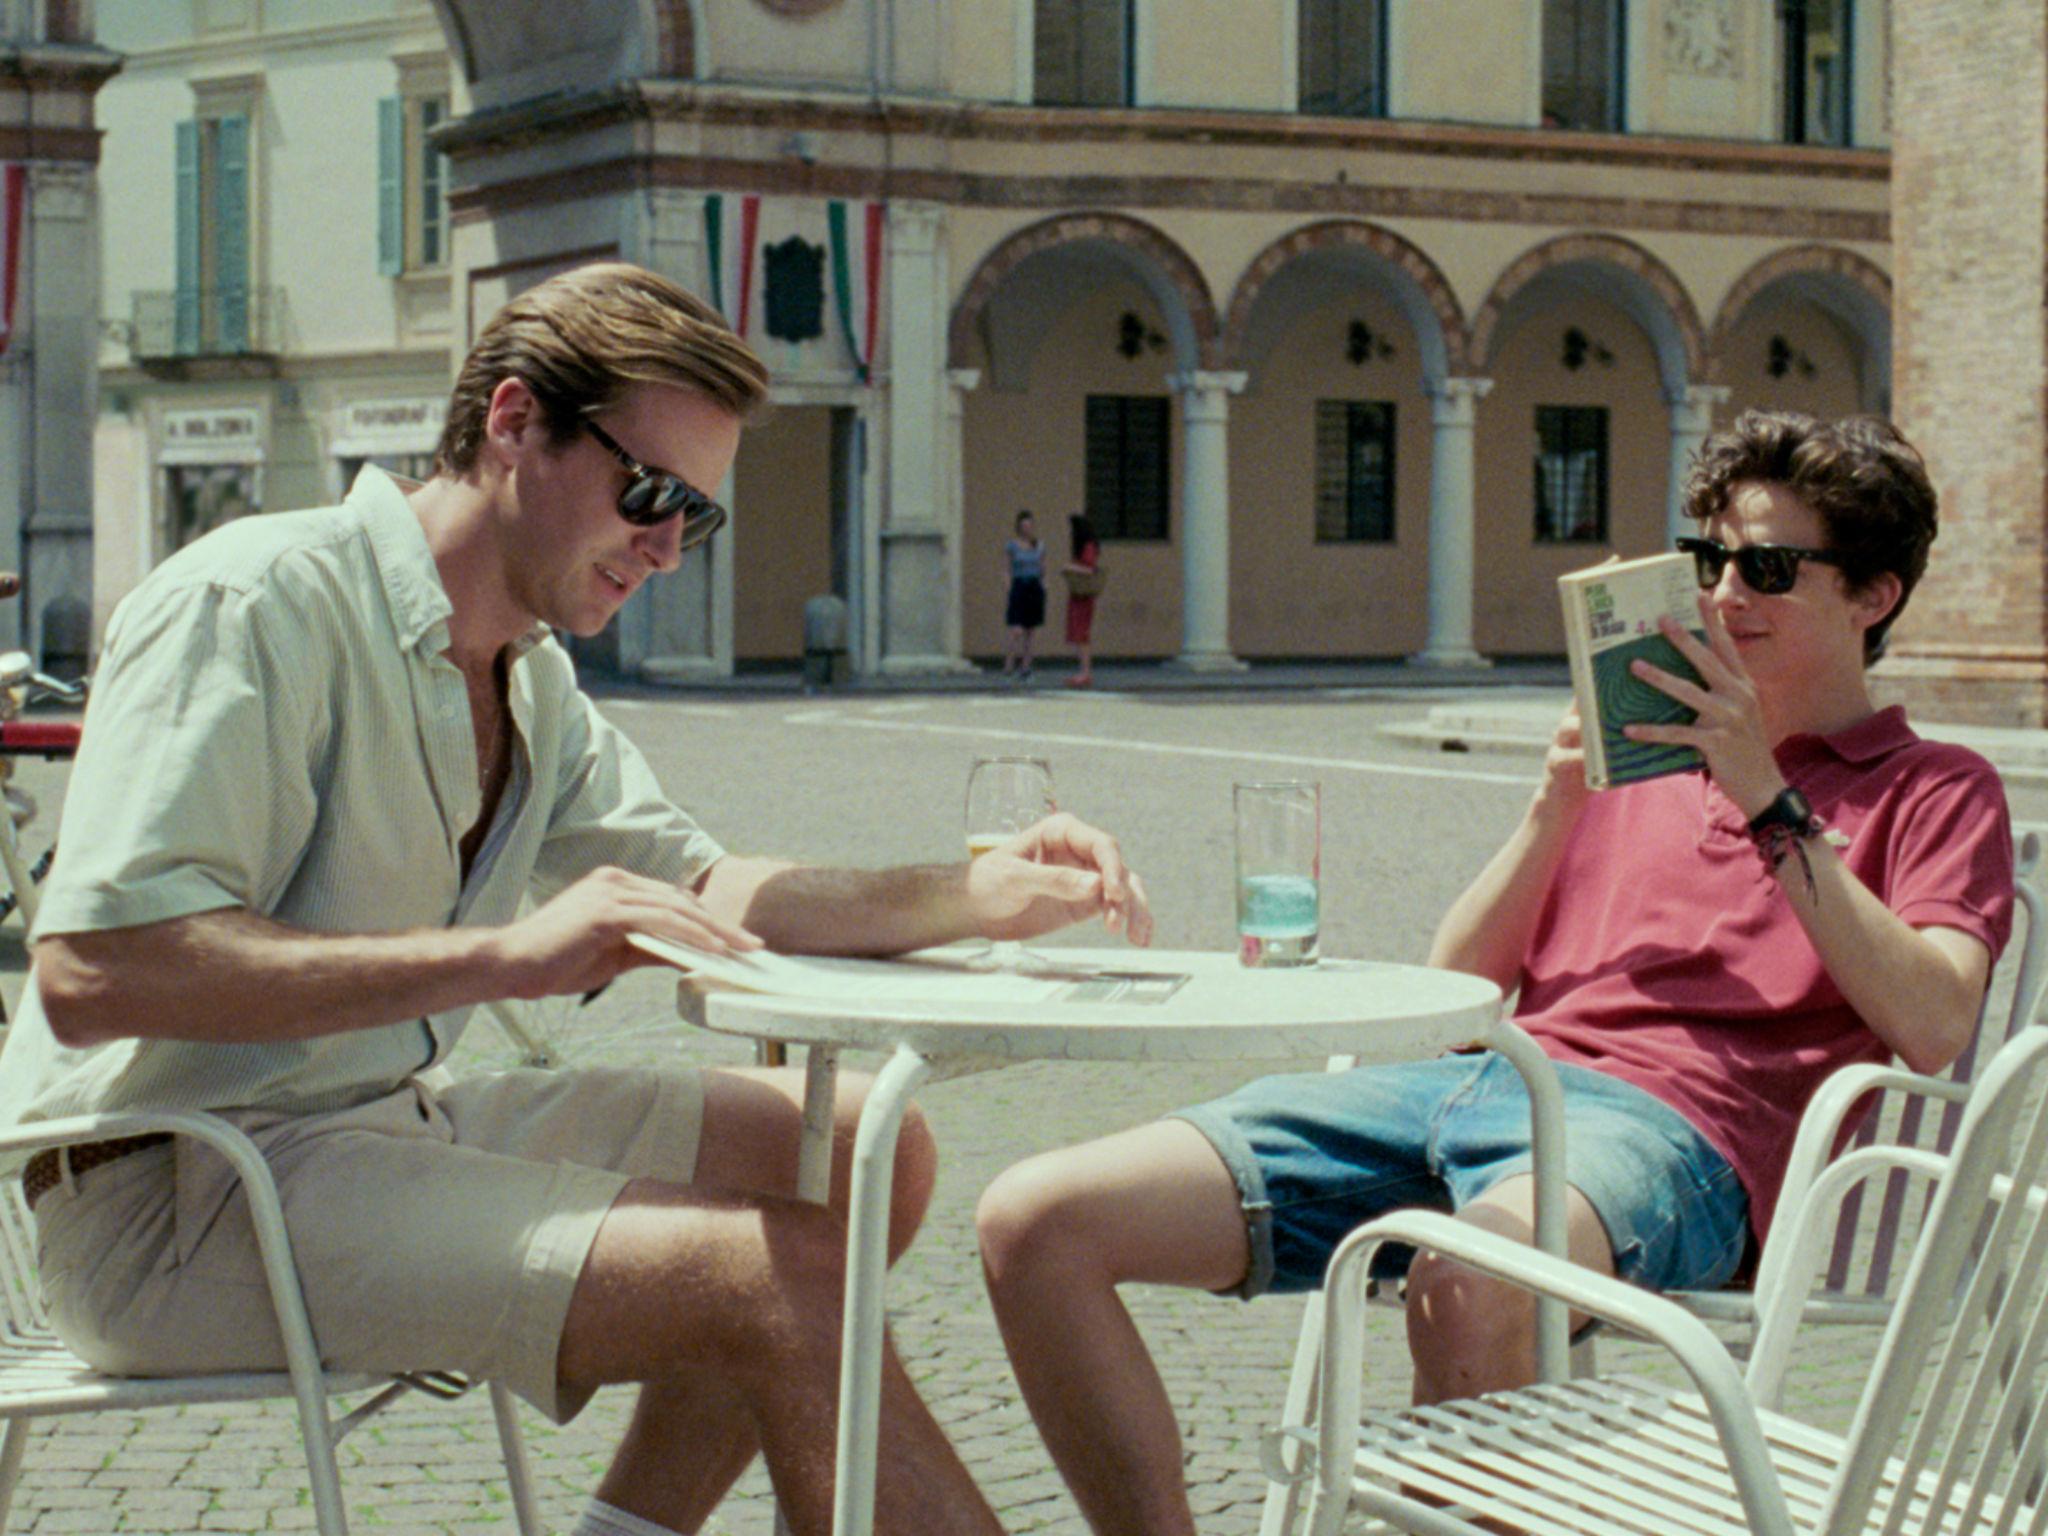 Hammer and Timothee Chalamet in ‘Call Me by Your Name’